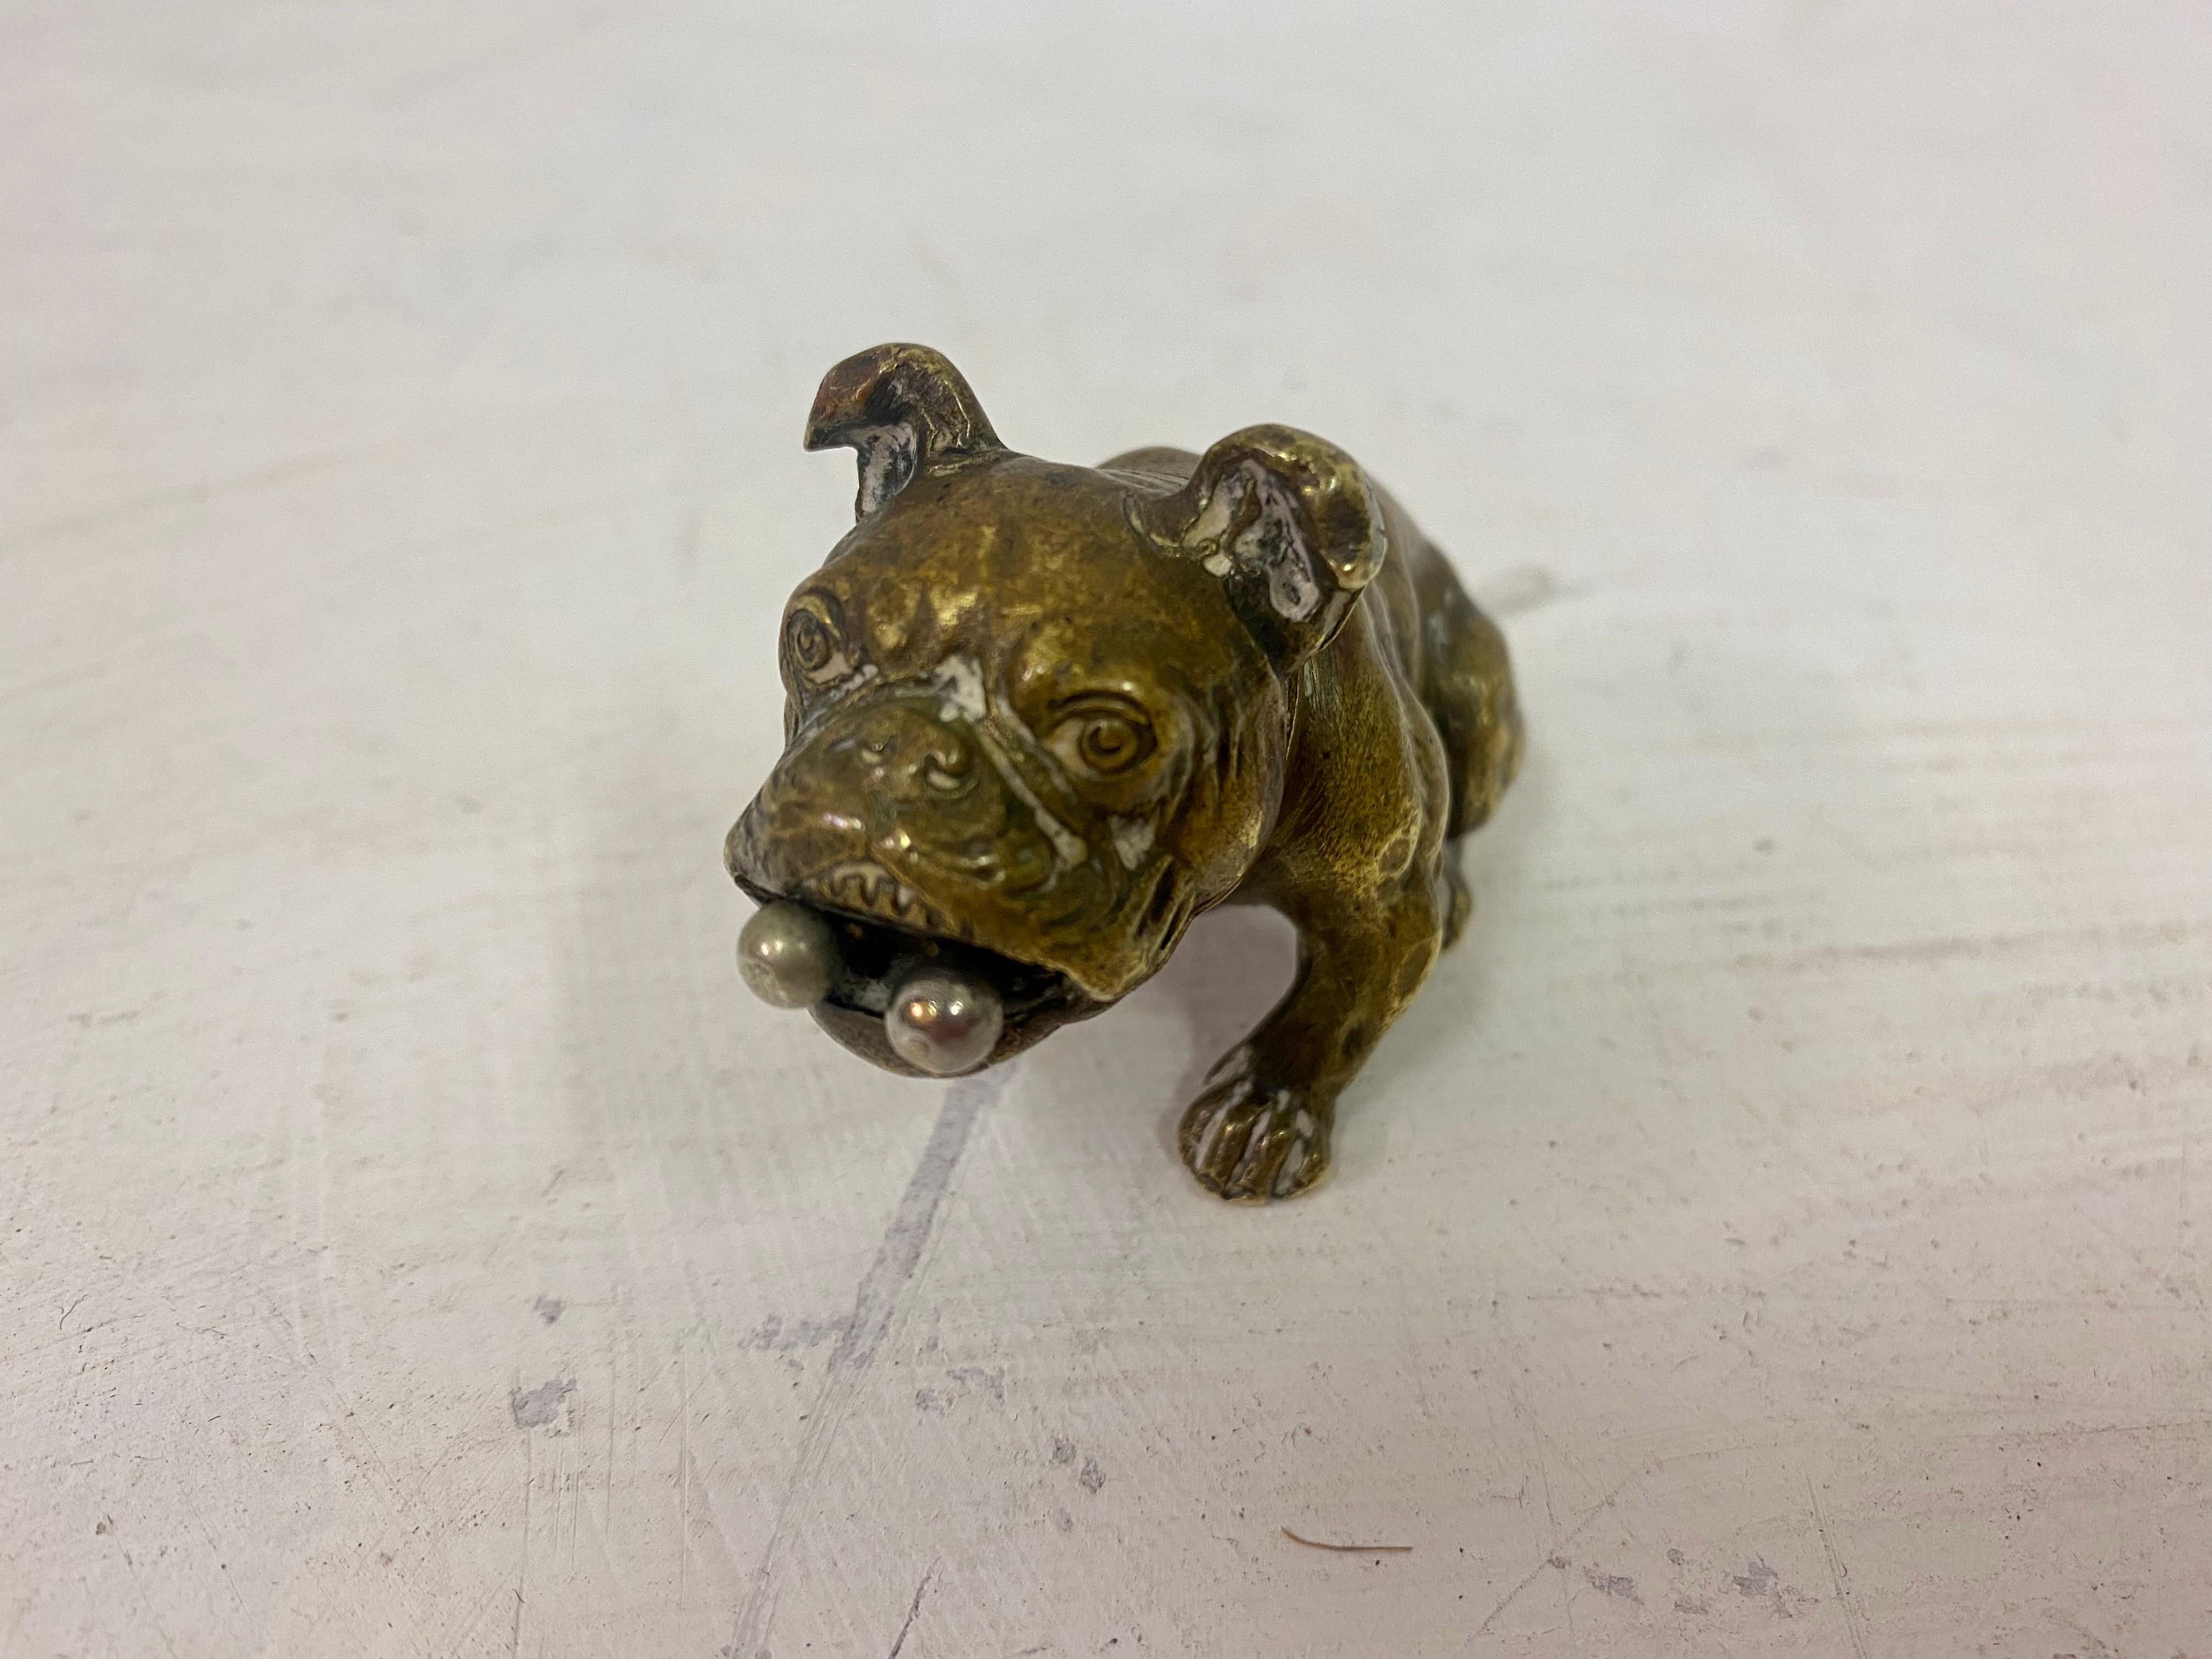 Cigar cutter

Shaped as a sitting bulldog

Bronze

Stamped Austria on paw

Cutter extends and retracts from mouth

Austria early 20th century.